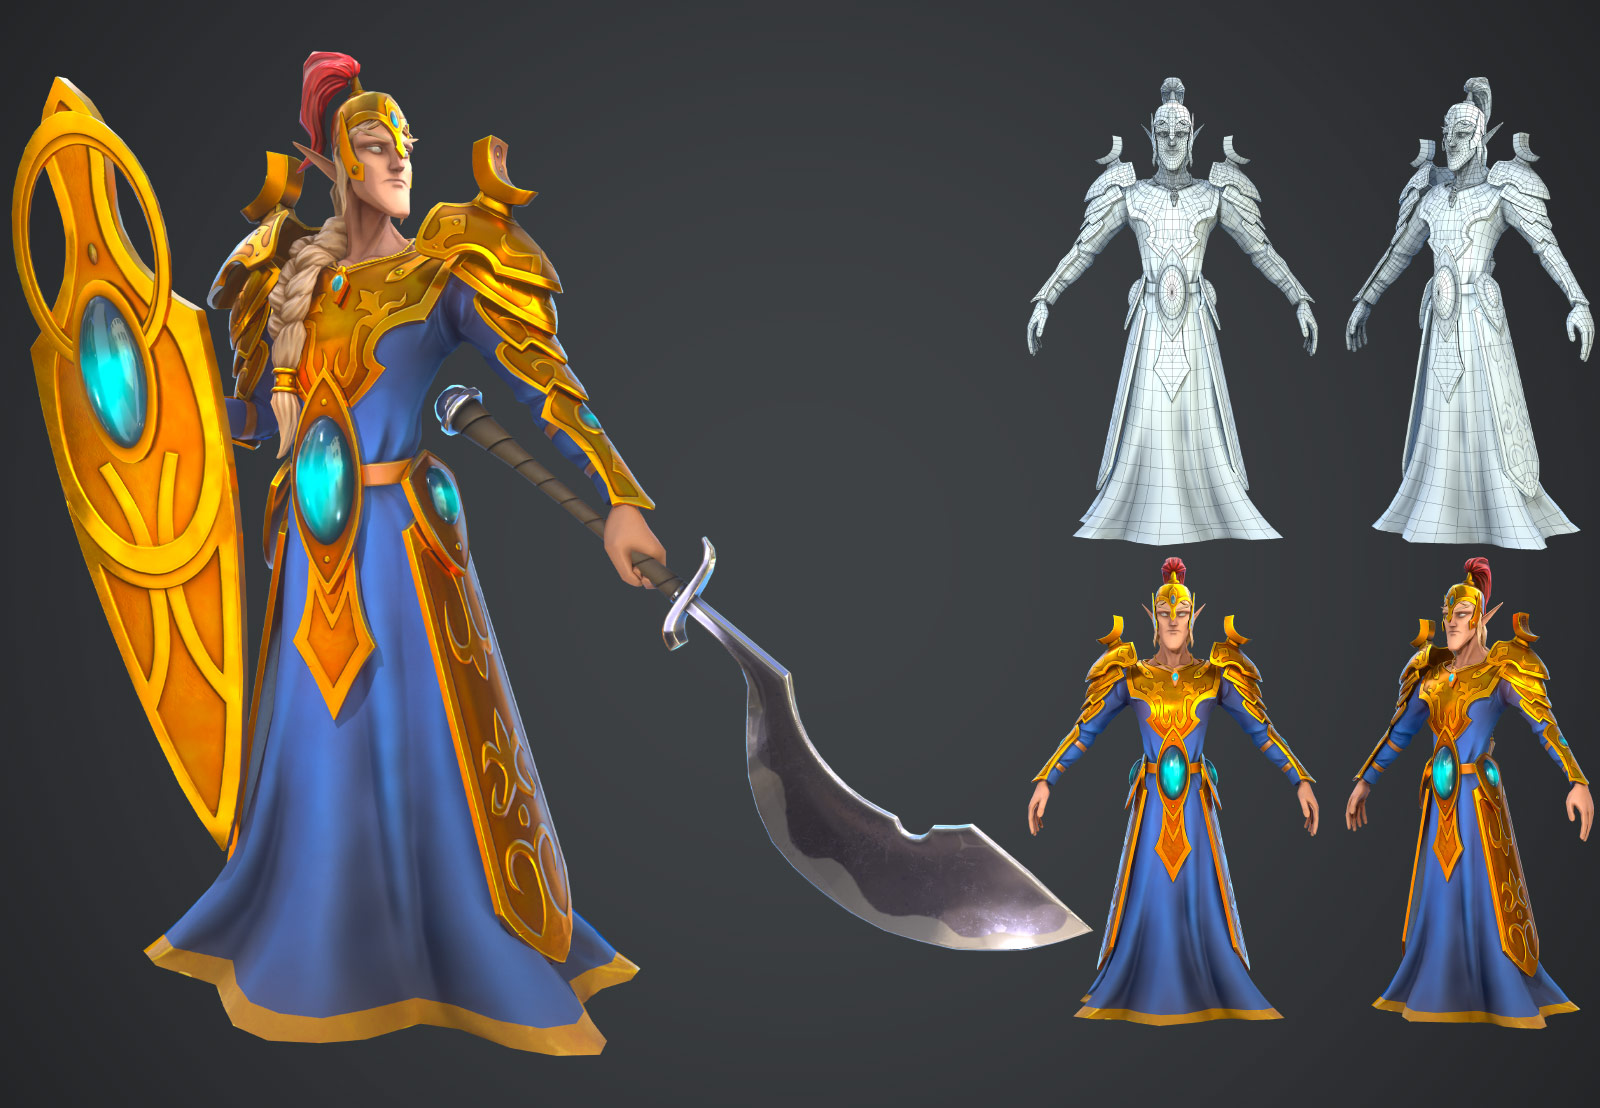 Store Concept - UI Art and Design. 3D Character Models by the Heroes Art  Team.